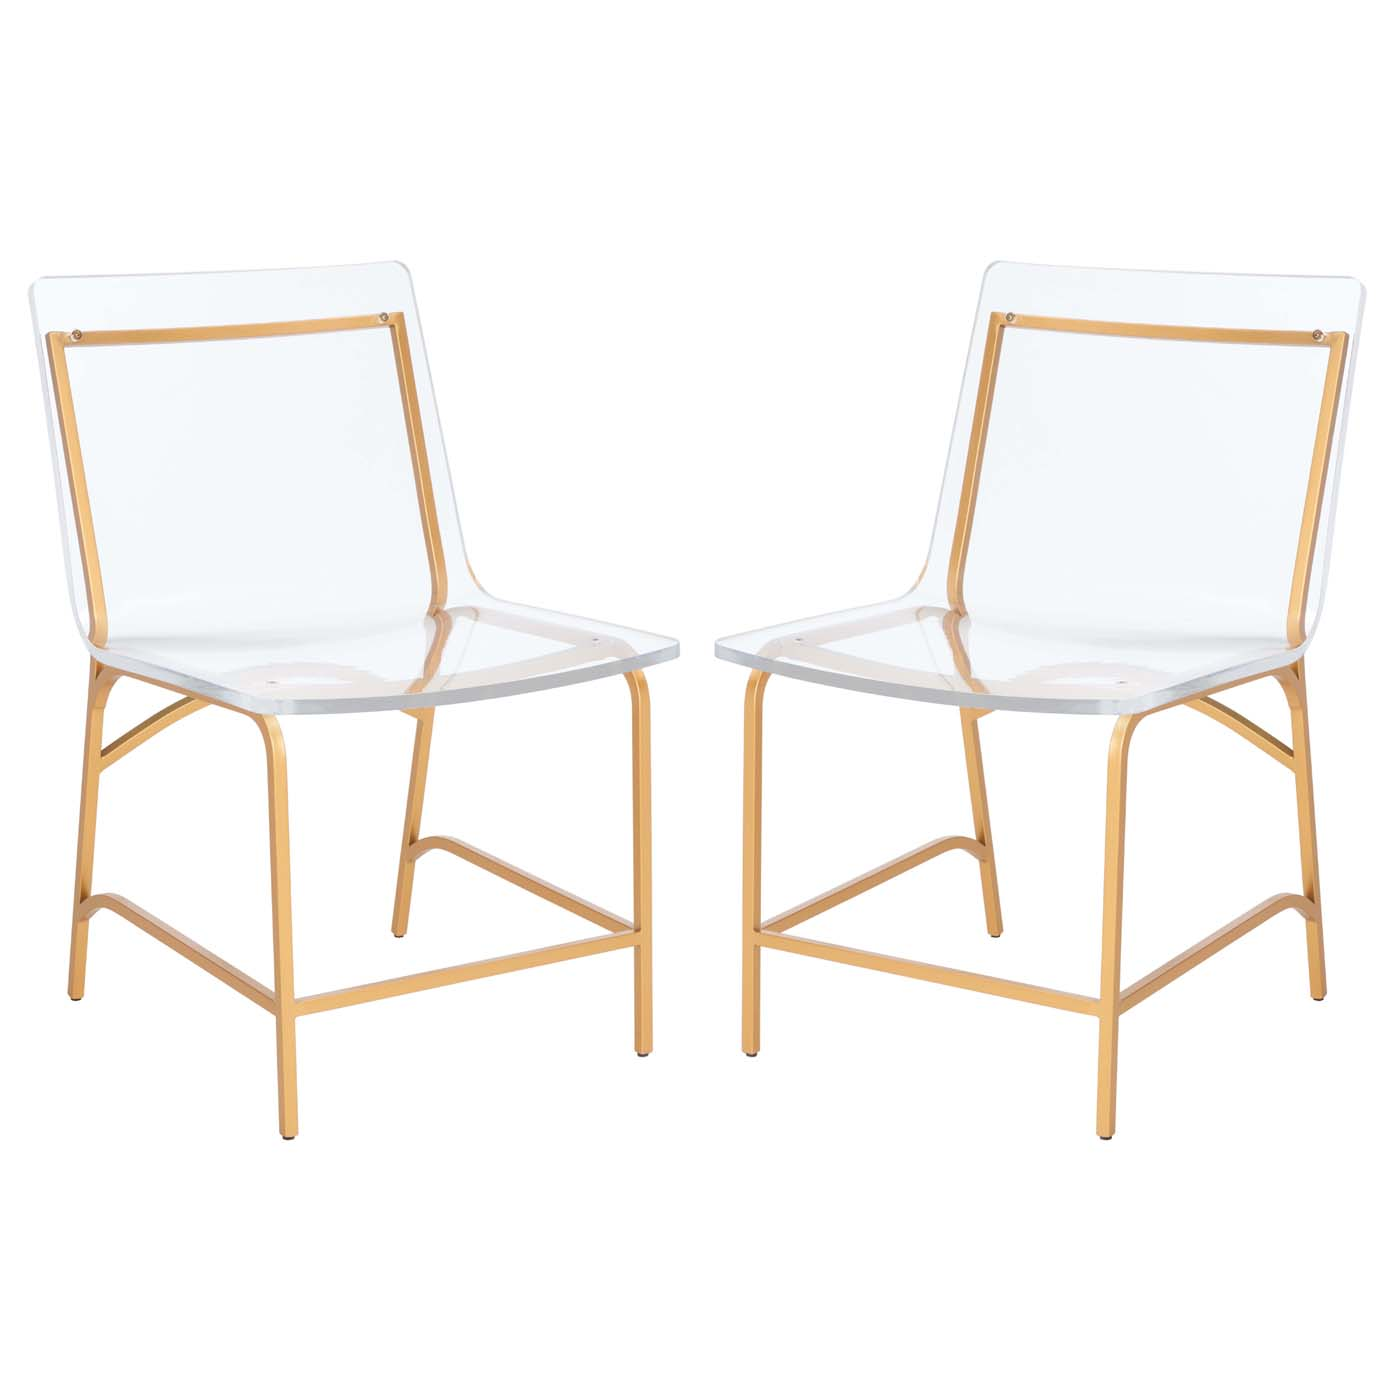 Safavieh Couture Bryant Acrylic Dining Chair